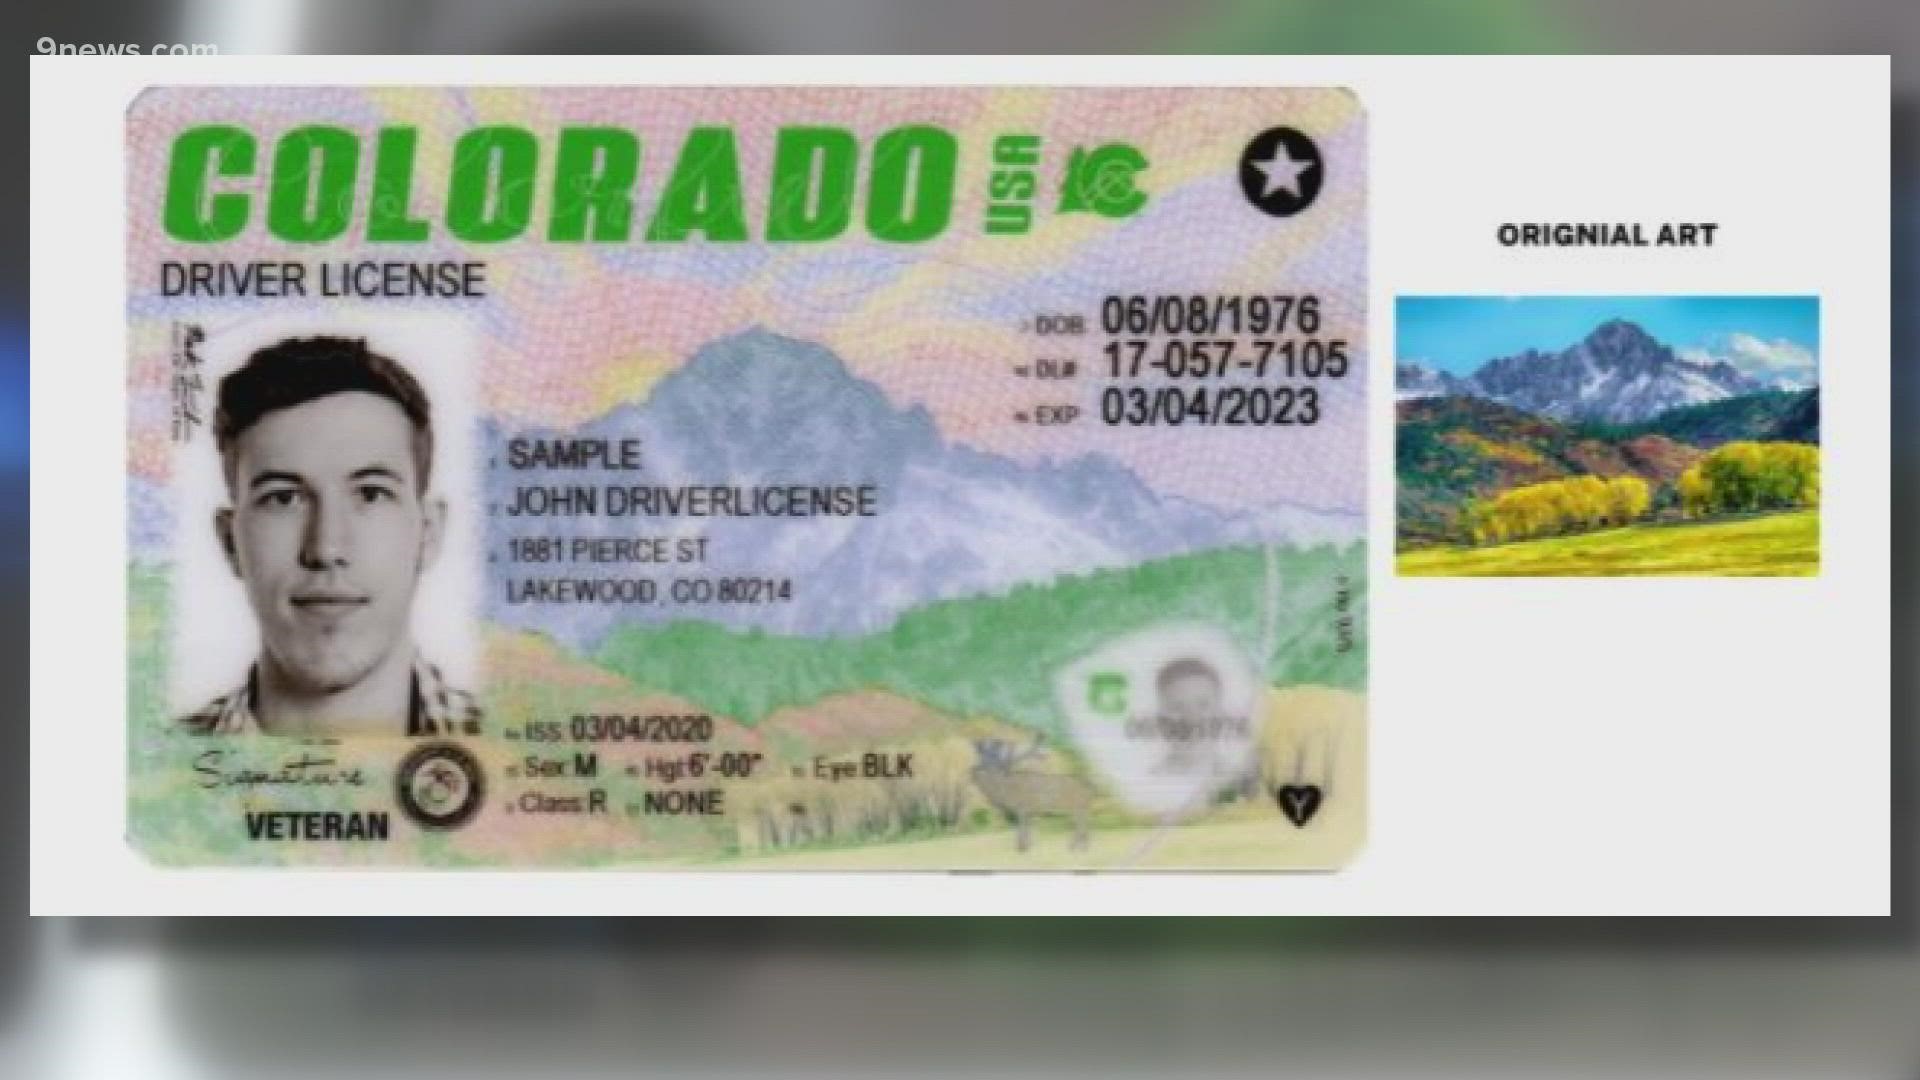 Colorado's new ID design was chosen from 407 submissions and a public vote.